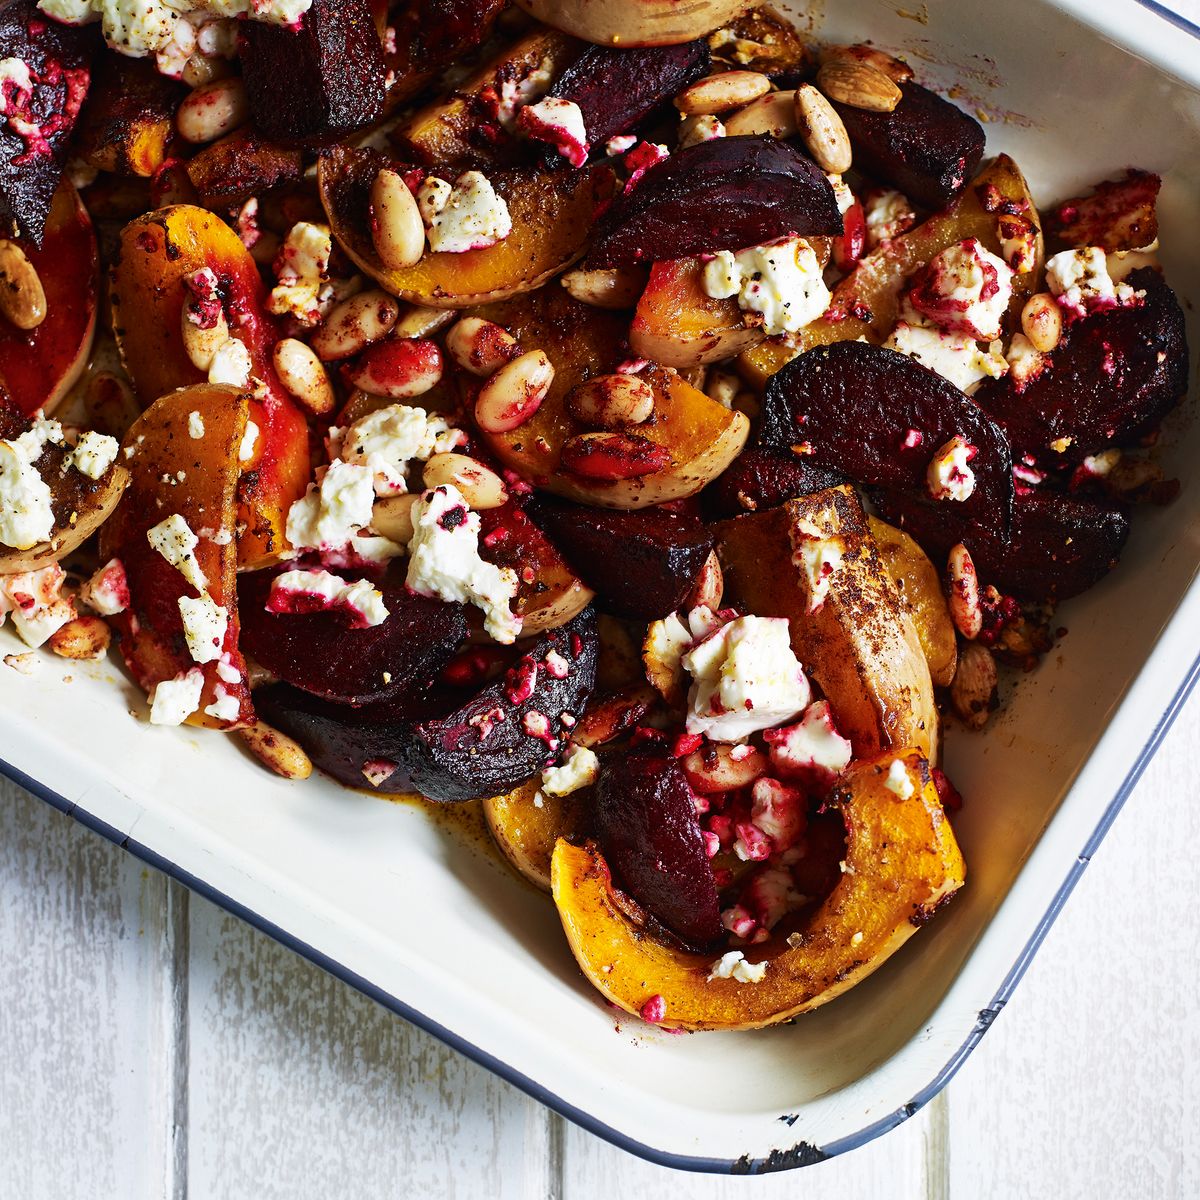 Try this delicious roasted squash with Middle Eastern spices